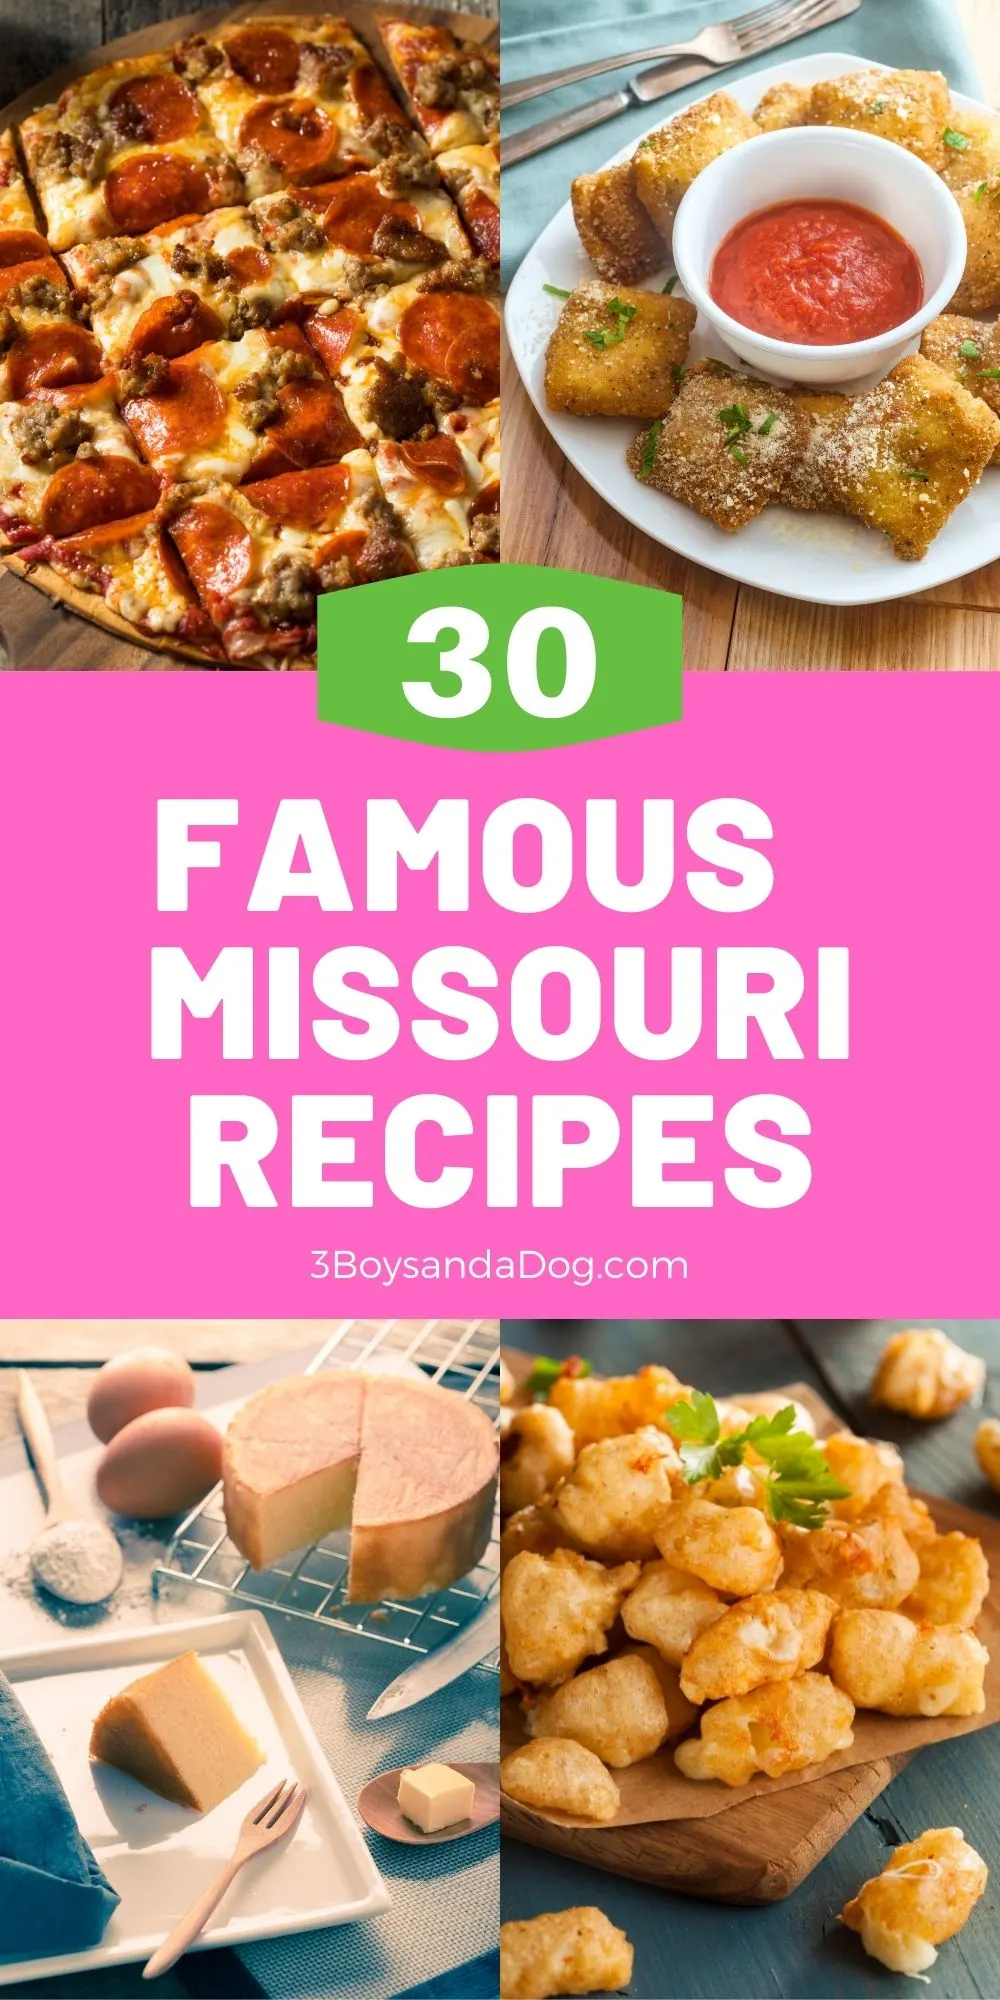 The feature pin with four famous Missouri foods